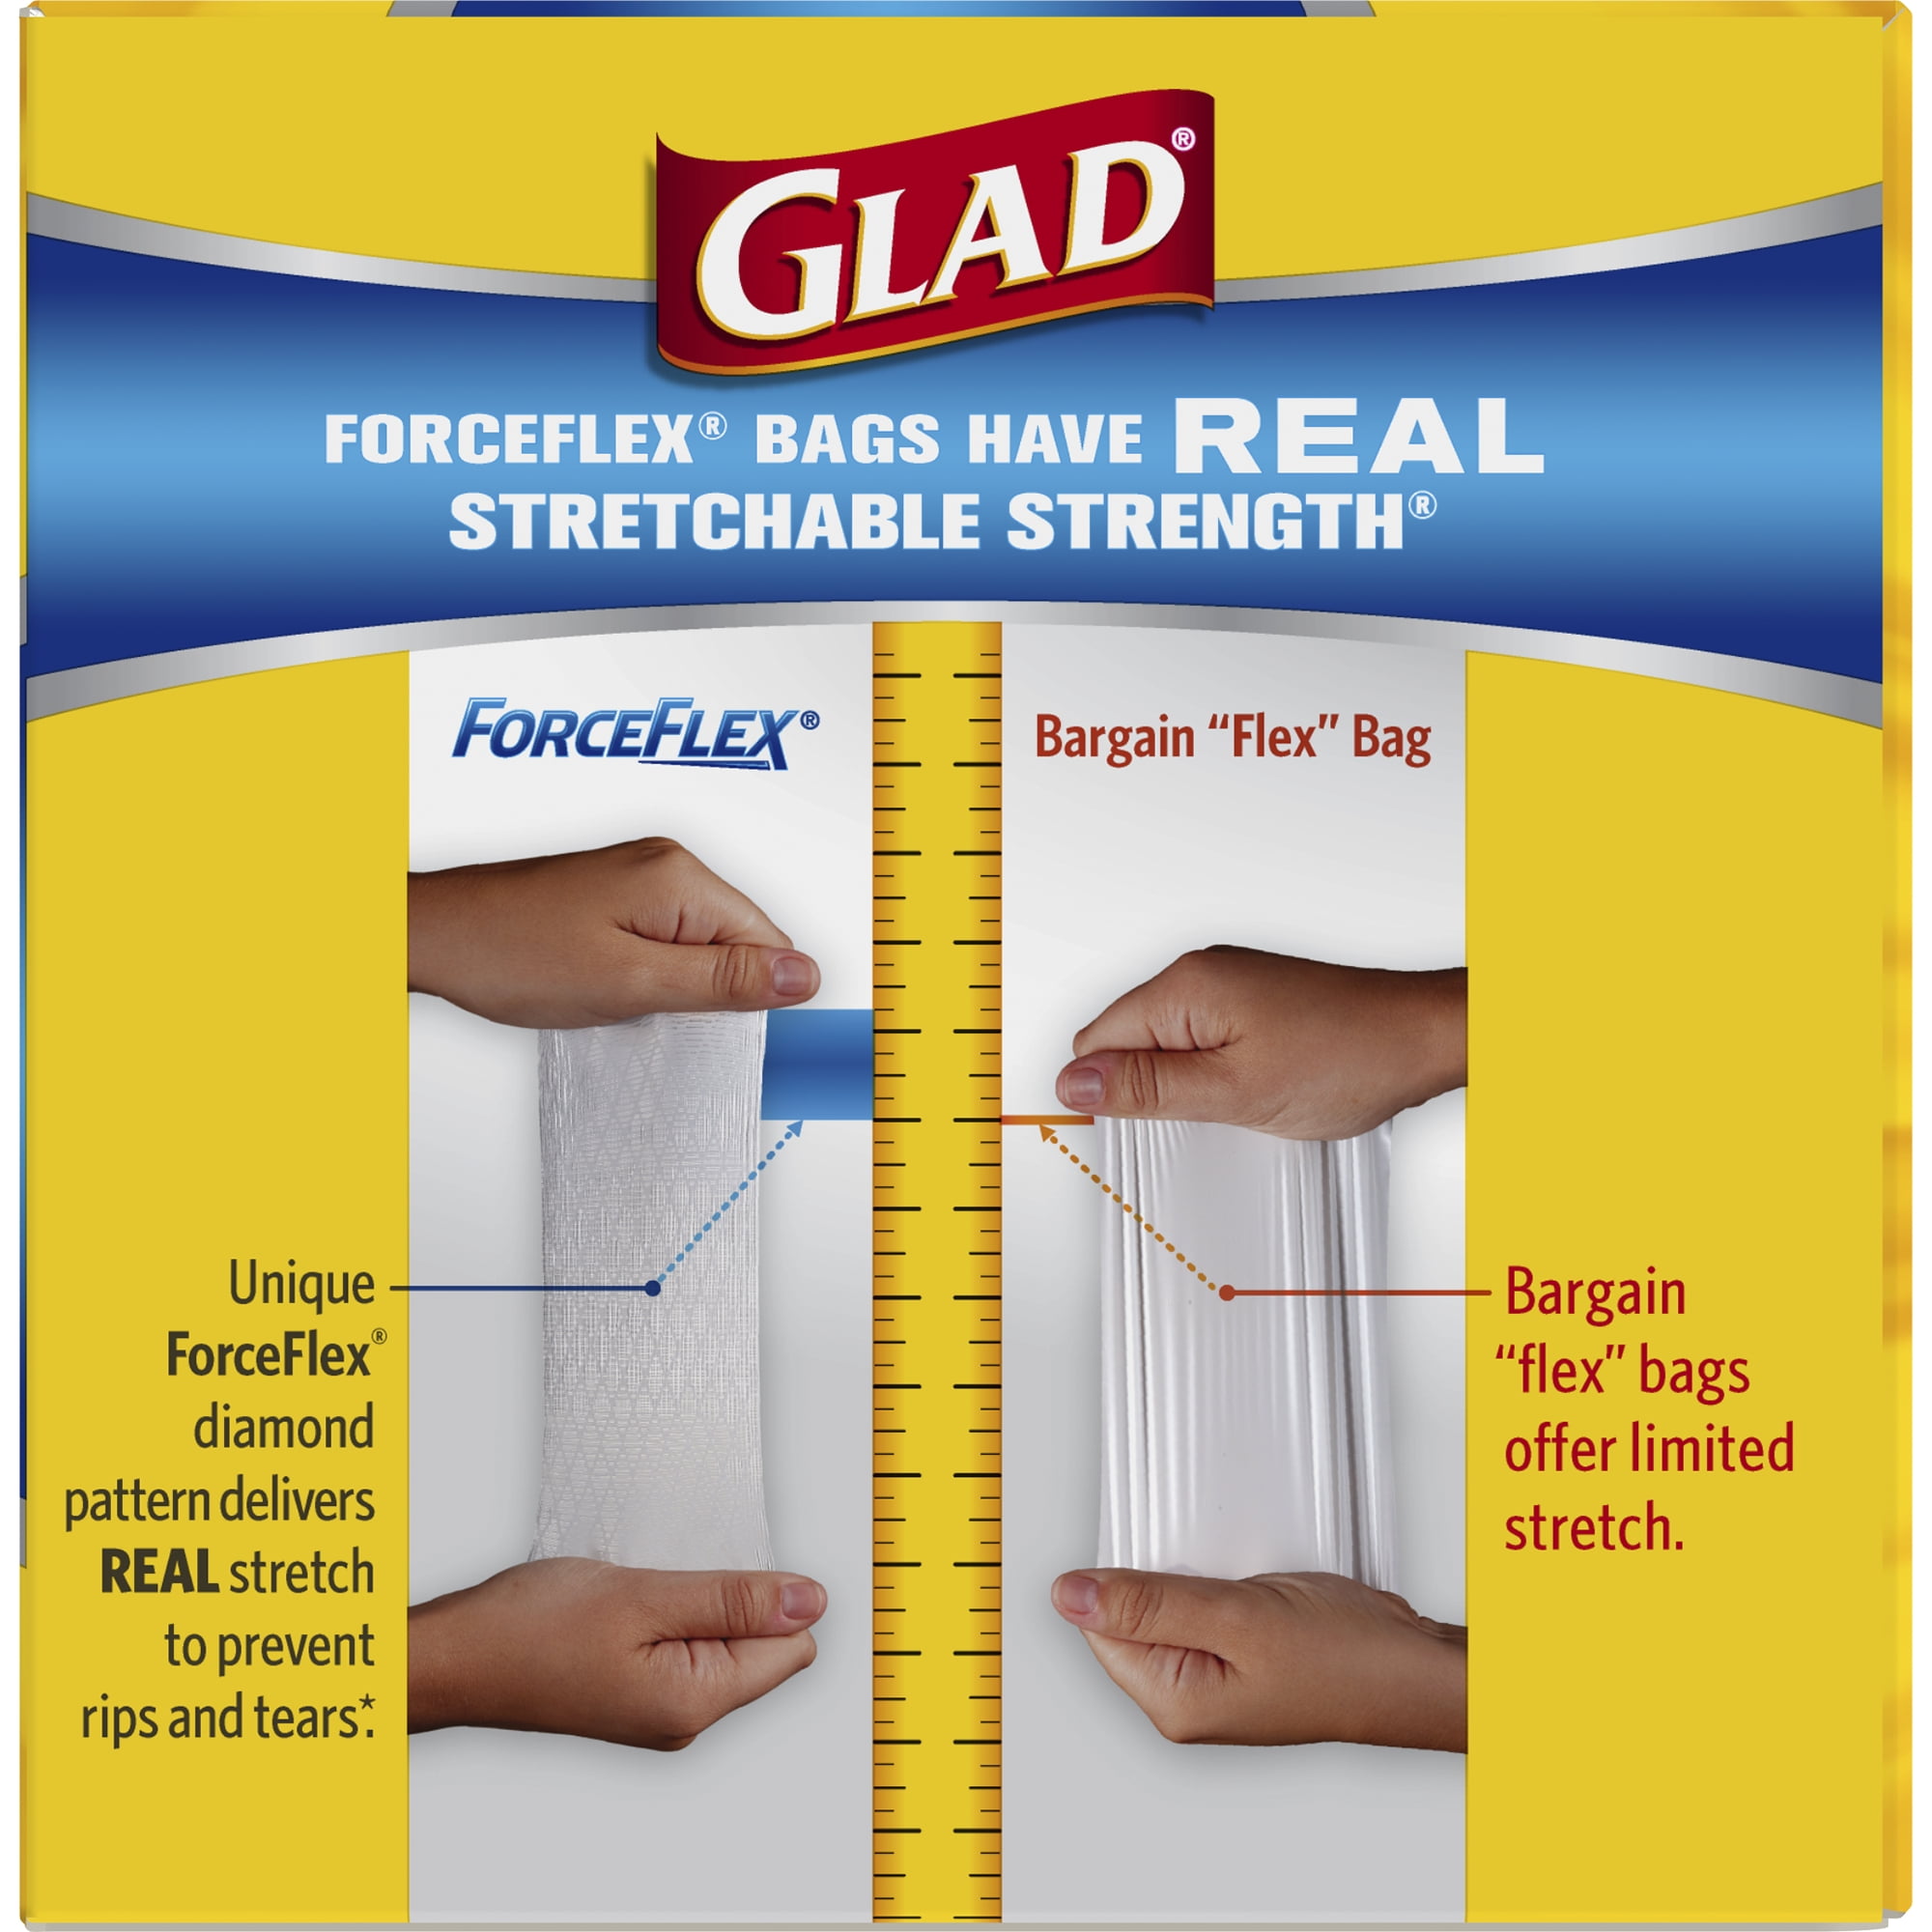 Glad ForceFlex 13 Gal. Unscented Tall Kitchen Drawstring Trash Bags  (45-Count) 1258778362 - The Home Depot